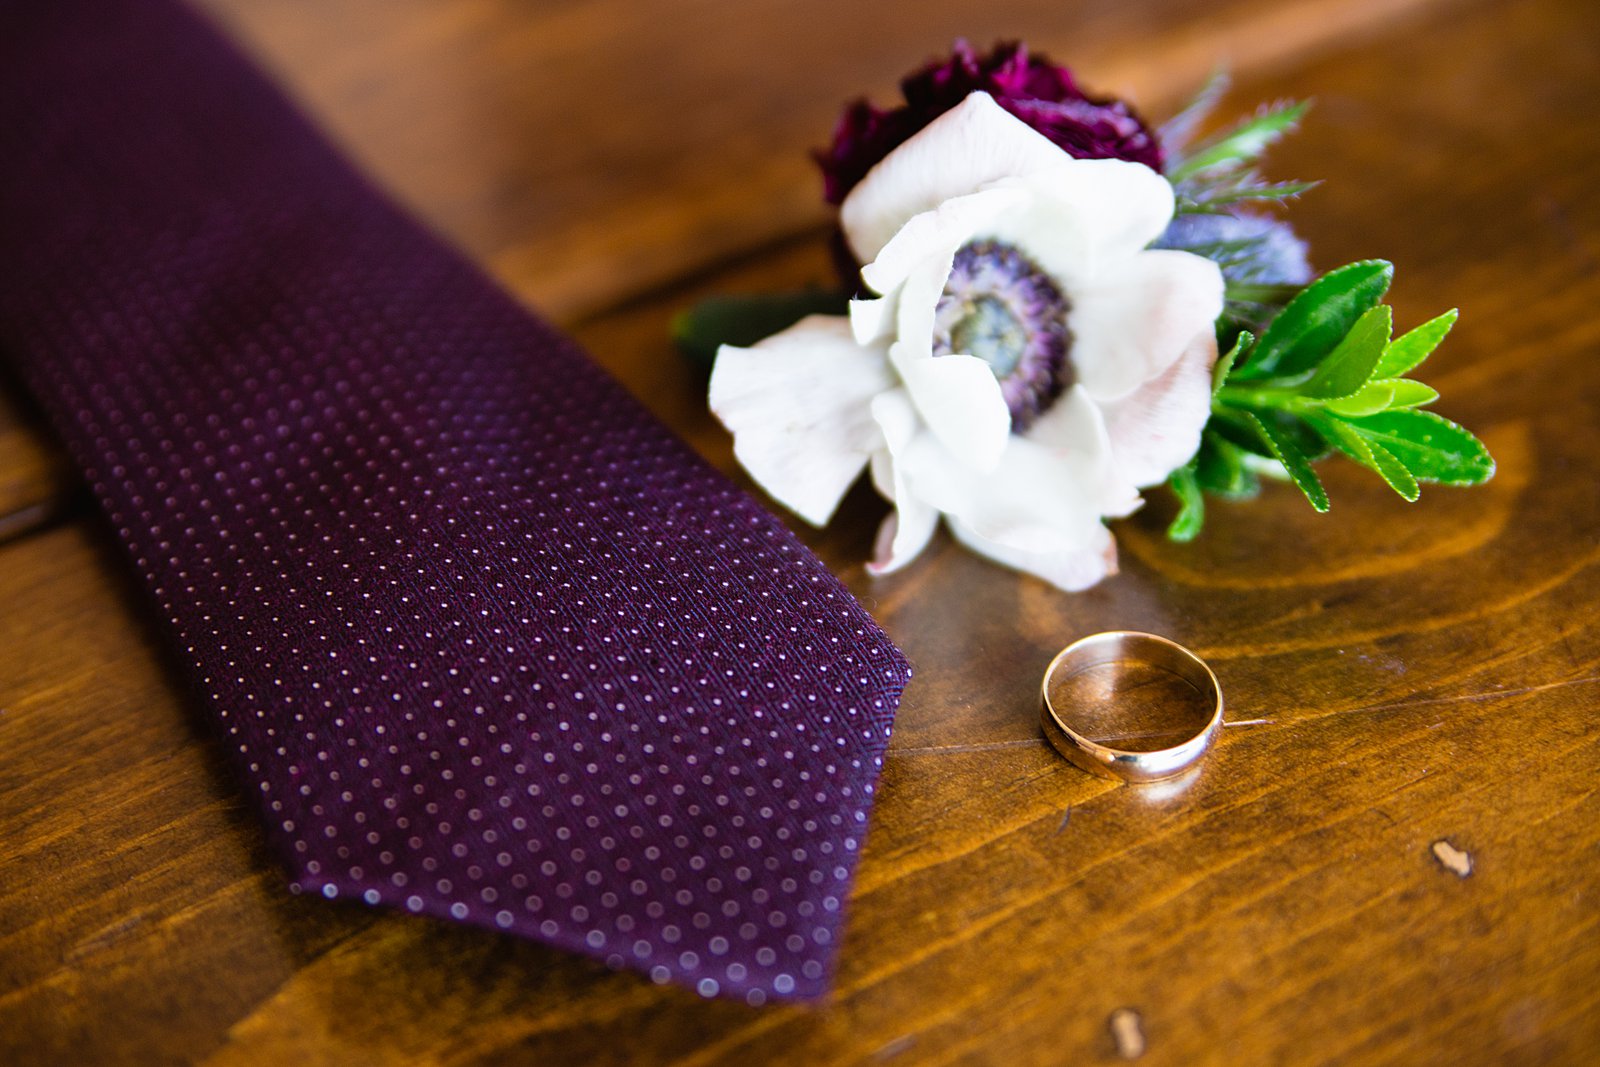 Groom's wedding day details of his ring, tie, and boutonniere by PMA Photography.